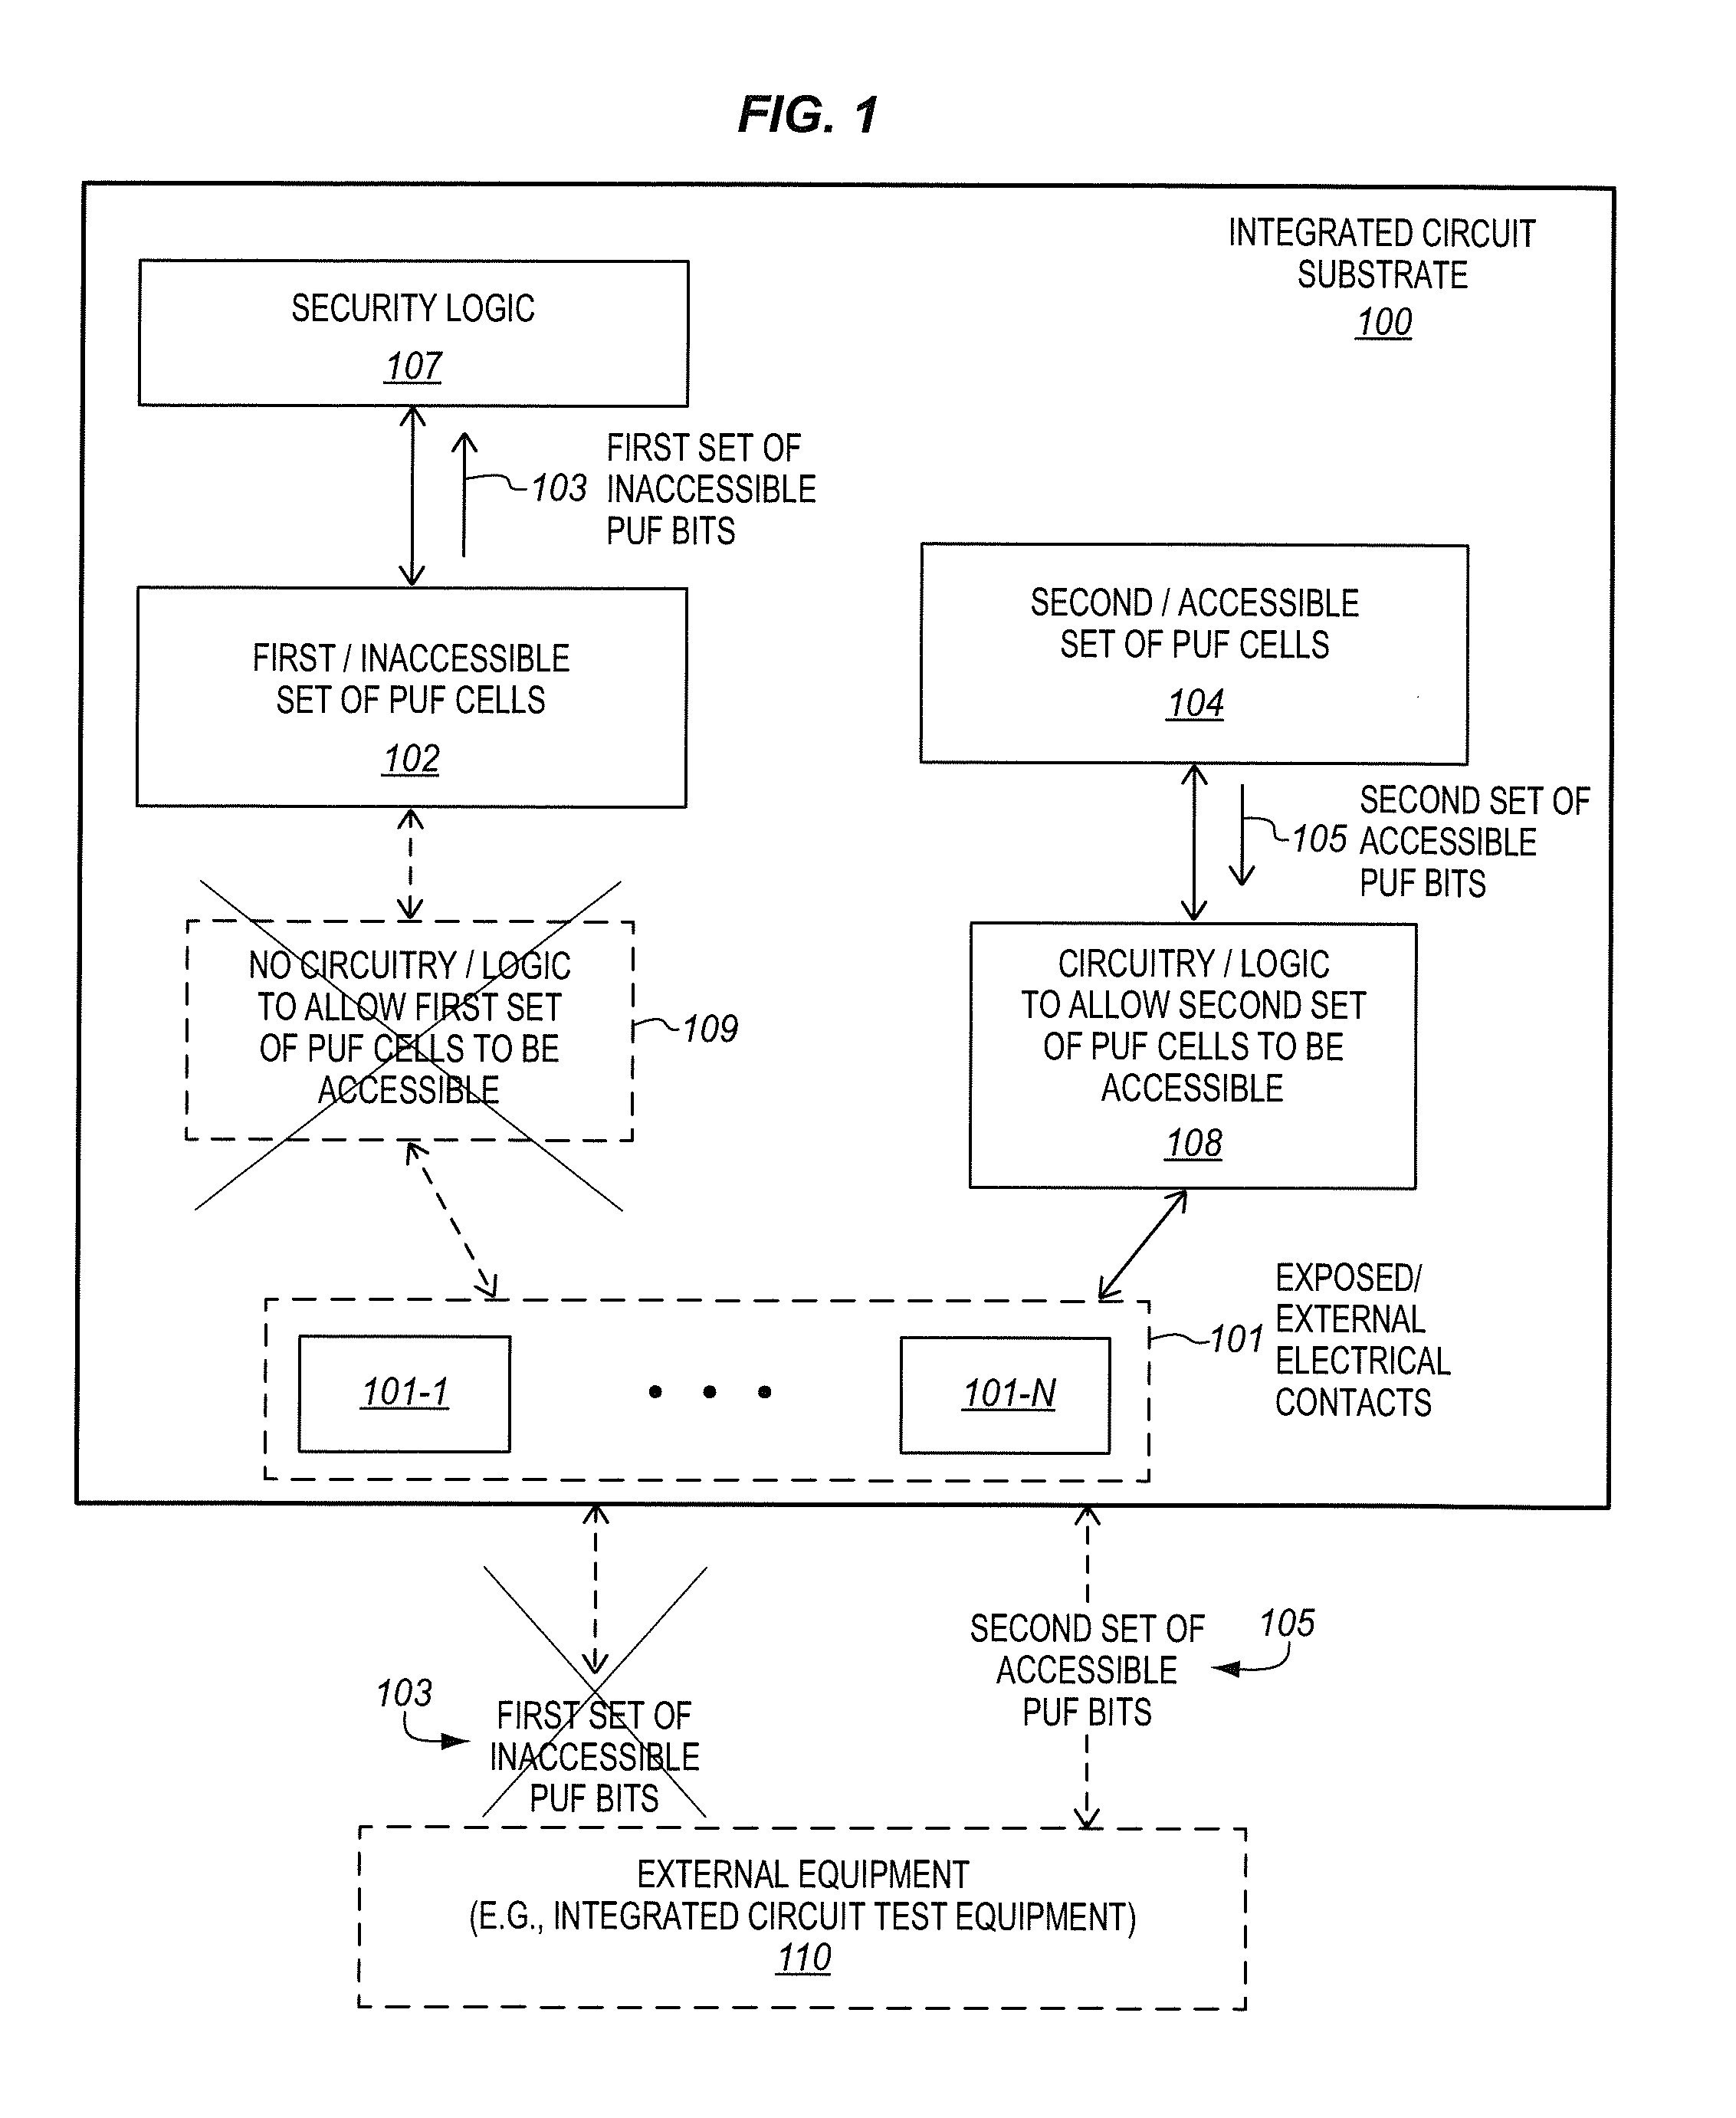 Integrated circuits having accessible and inaccessible physically unclonable functions